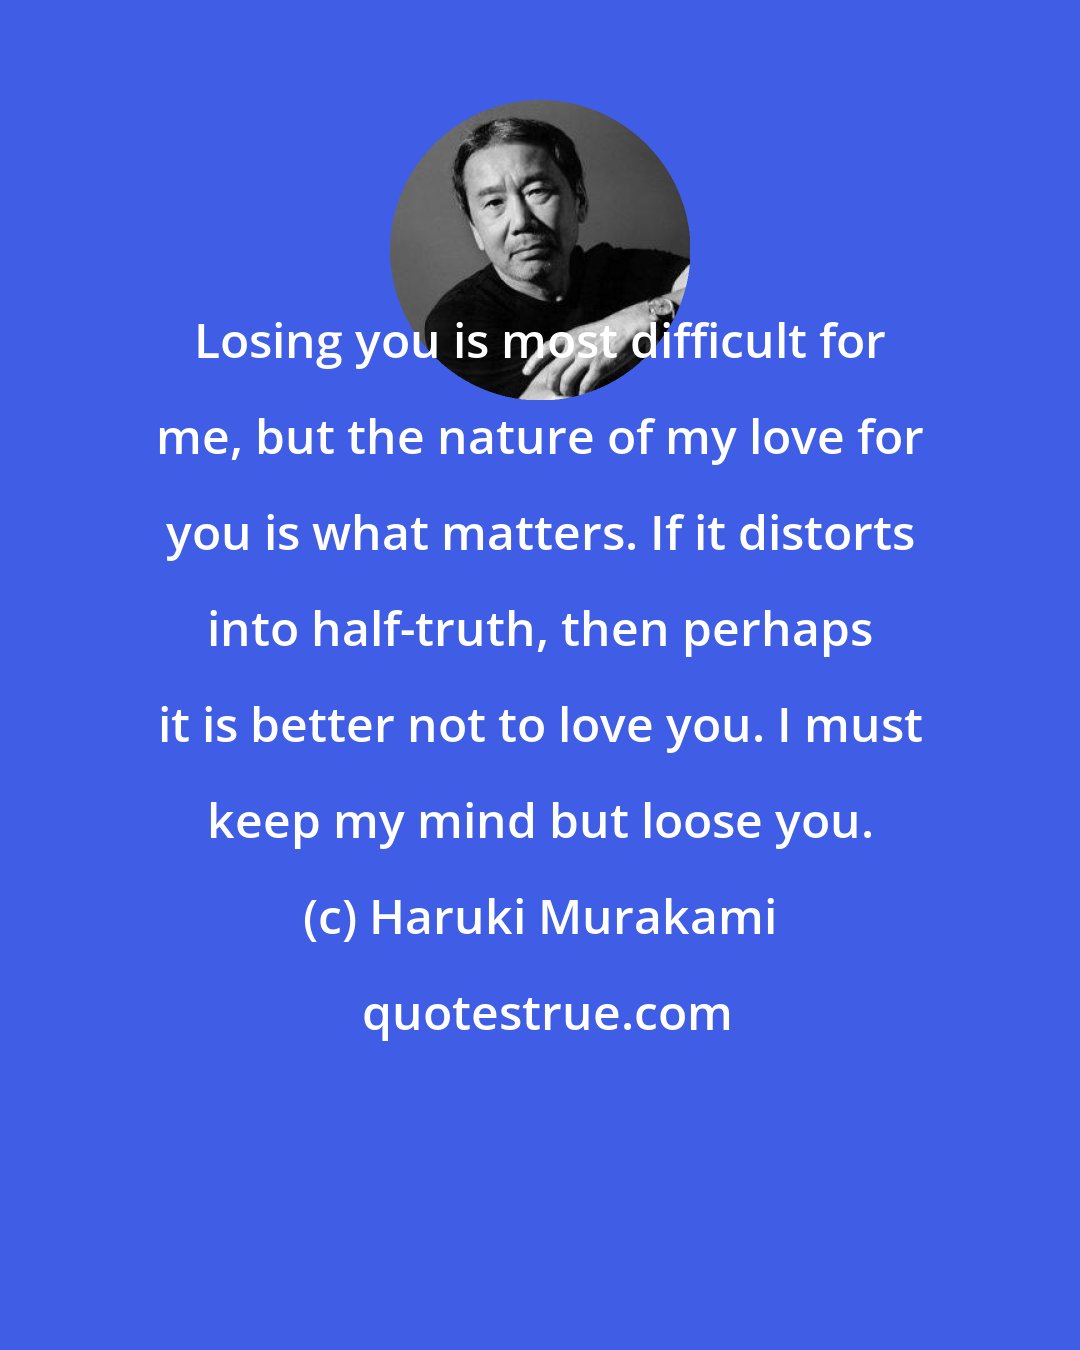 Haruki Murakami: Losing you is most difficult for me, but the nature of my love for you is what matters. If it distorts into half-truth, then perhaps it is better not to love you. I must keep my mind but loose you.